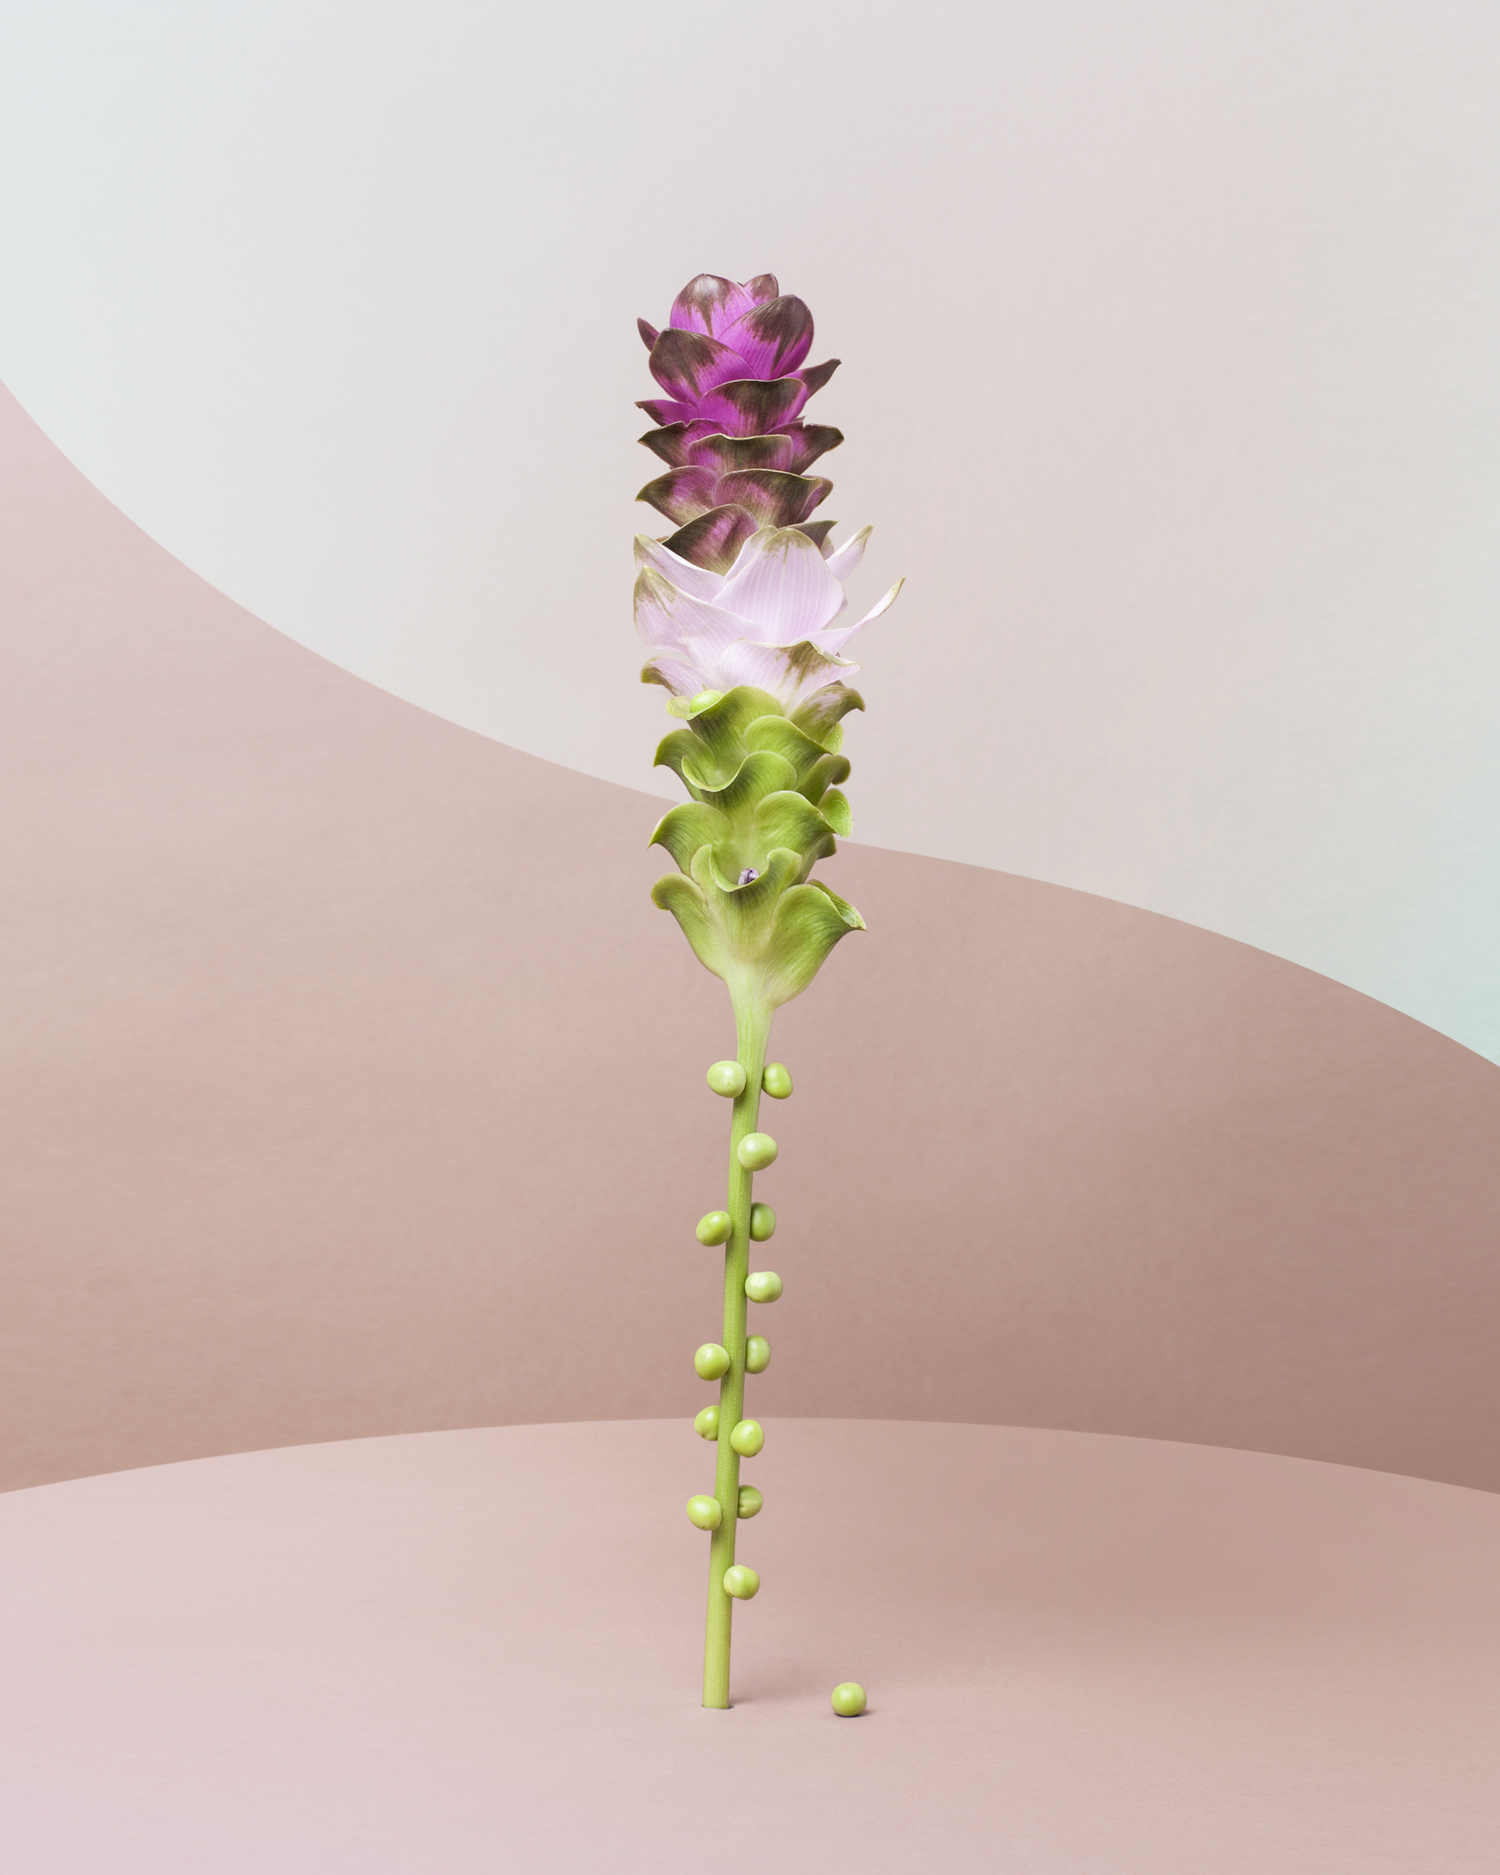 Tall Flower with peas